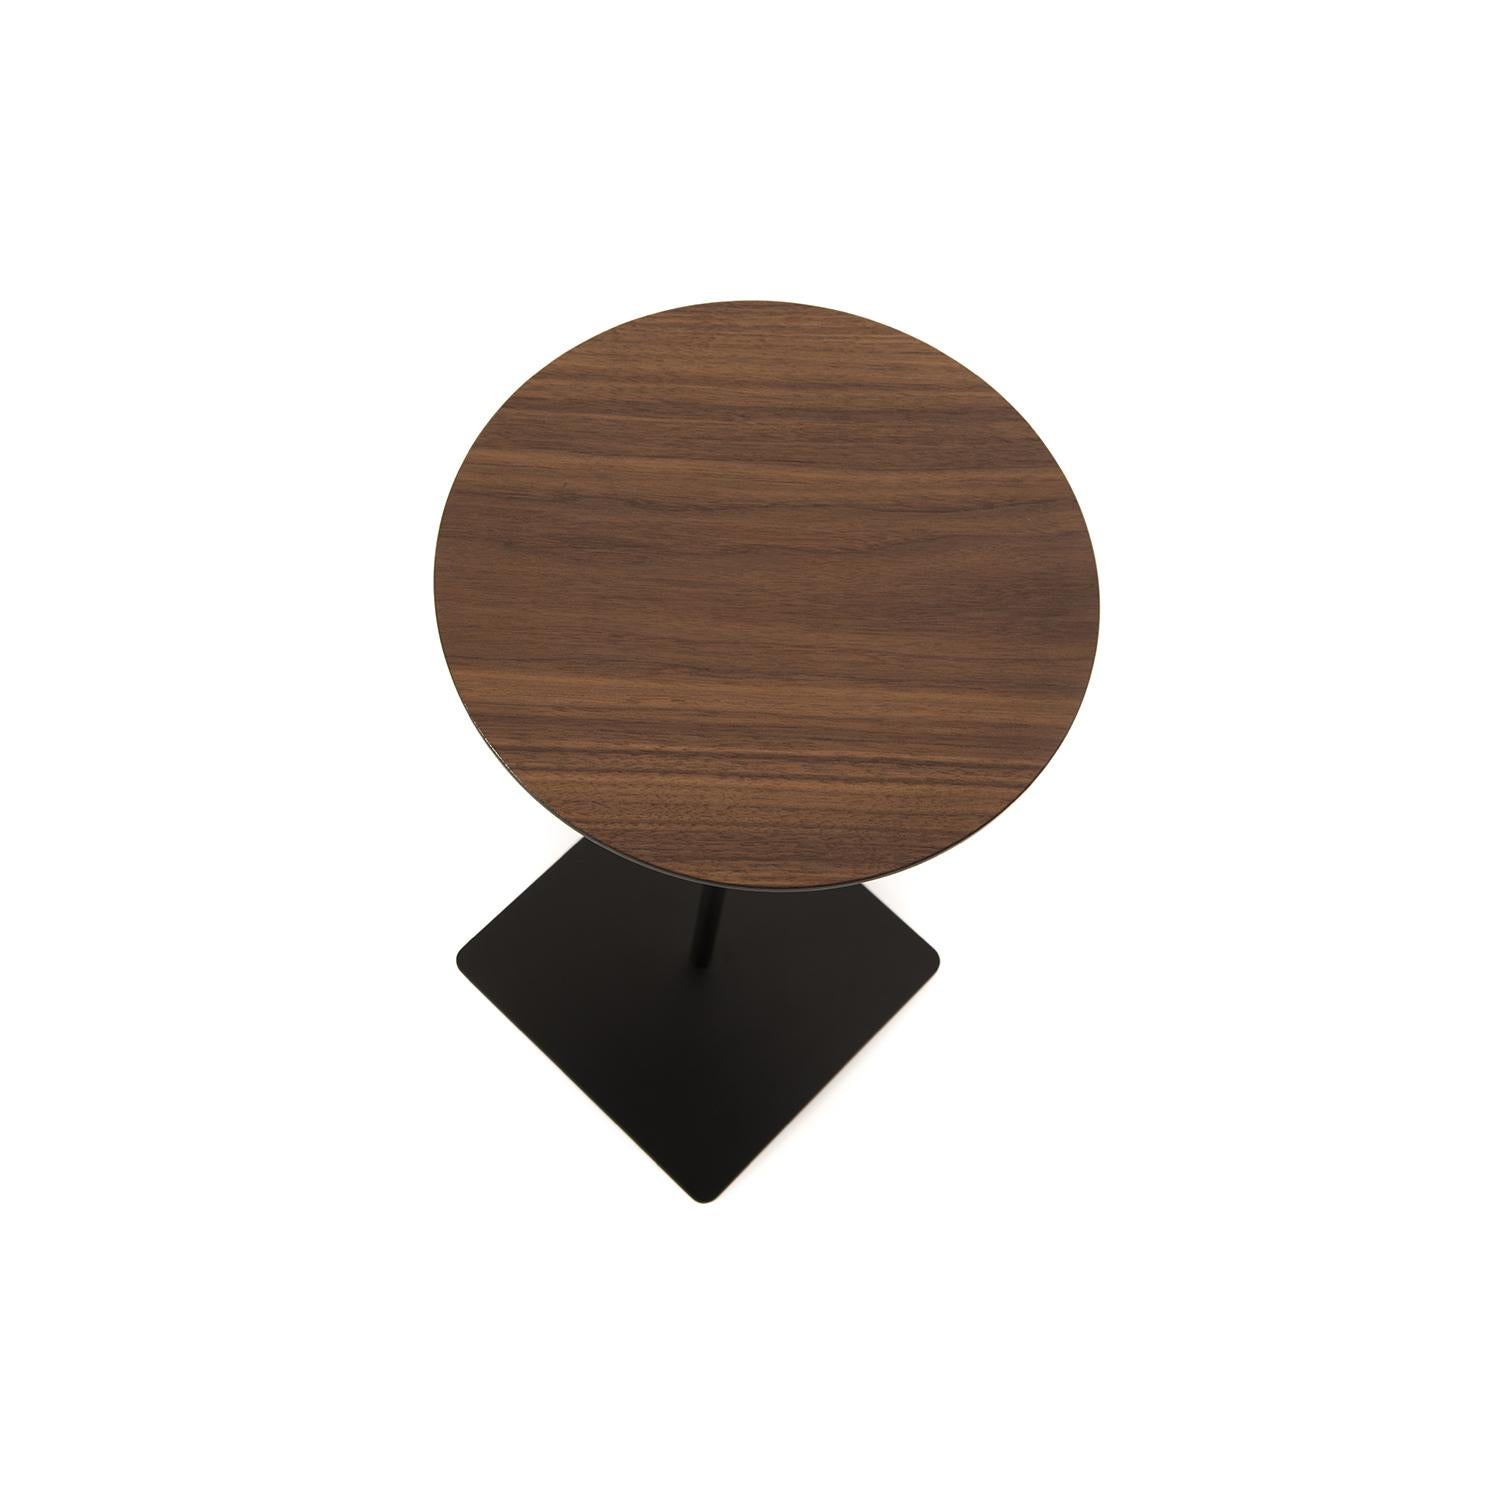 This round top walnut table sits upon a slender, black stem with a square base.